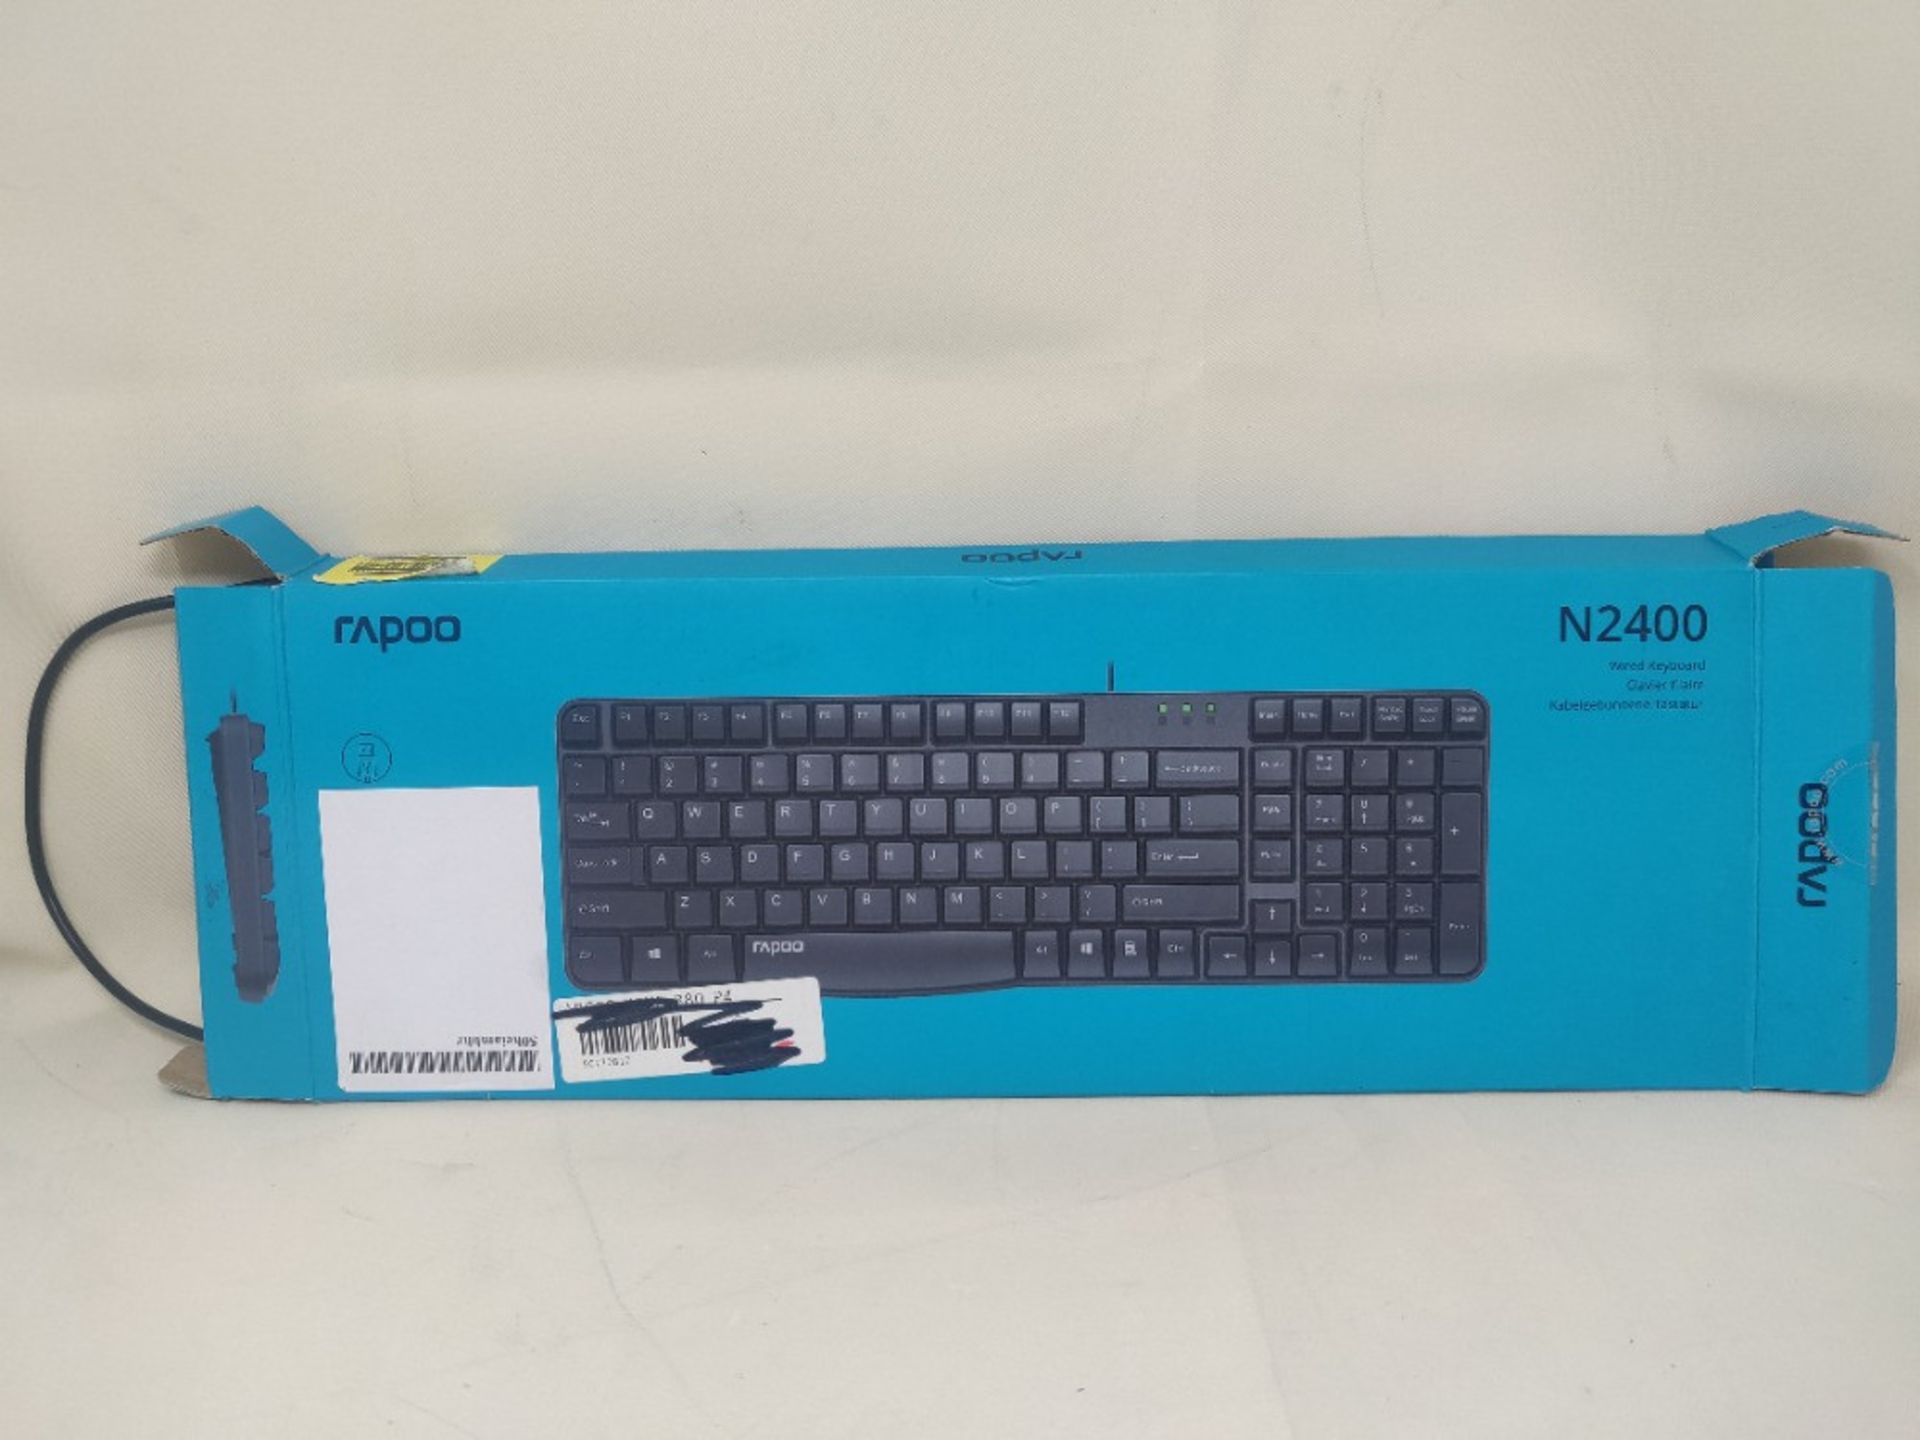 Rapoo N2400 Wired Spill-resistant Keyboard, Black, UK Layout - Image 2 of 3